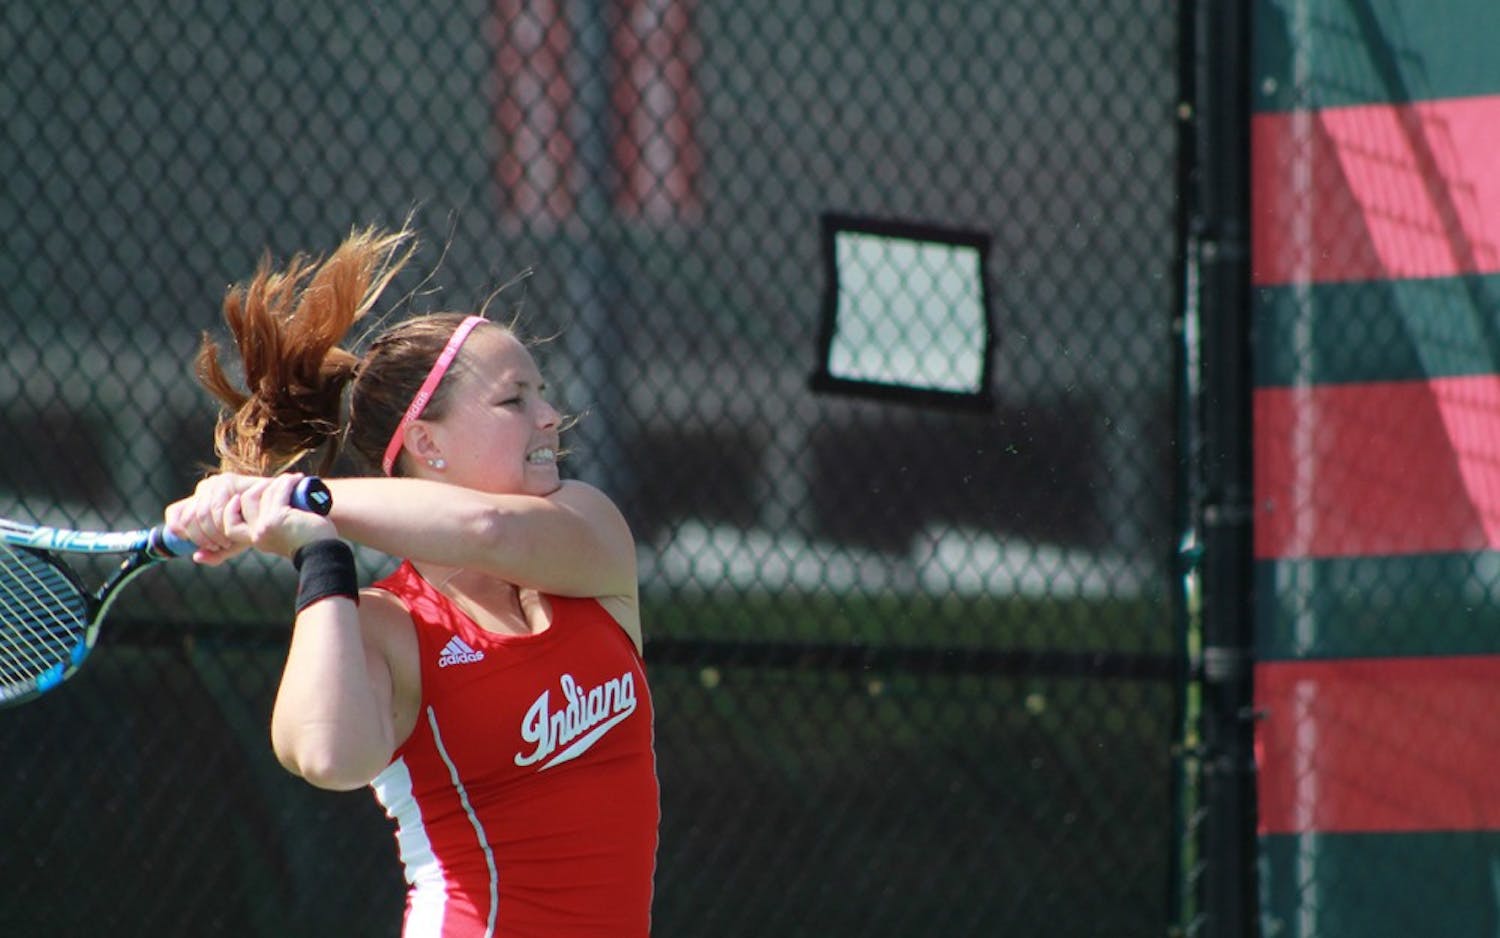 Graduate senior,&nbsp;Alicia Robinson hits the ball in a singles match Sunday morning. The Hoosiers took on the Wildcats in their final home match of the season.&nbsp;